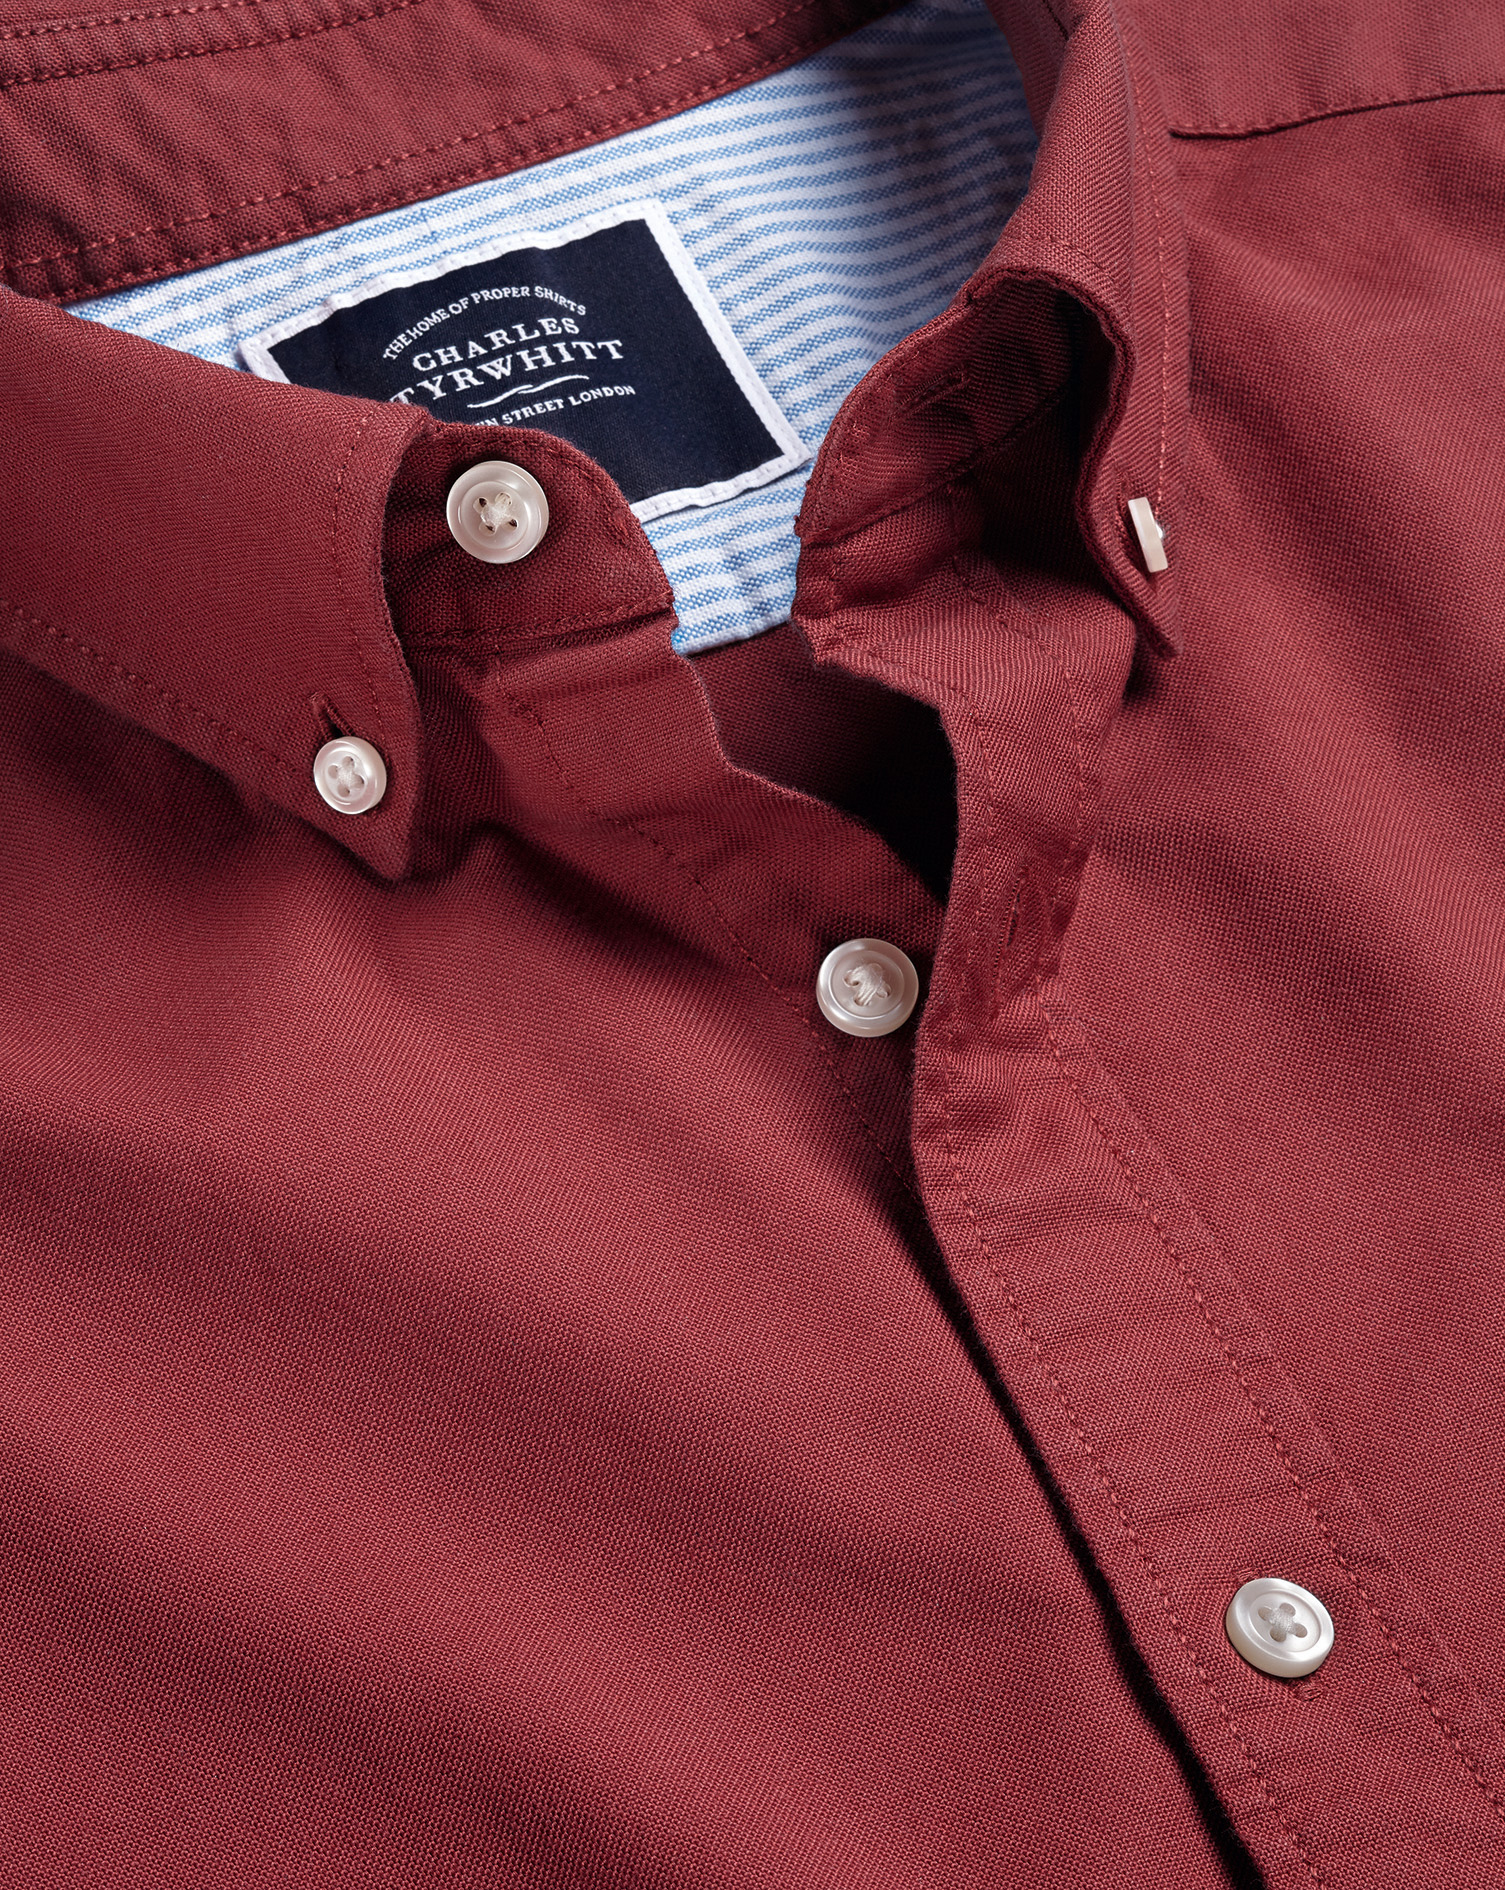 Button-Down Collar Washed Oxford Cotton Casual Shirt - Maroon Red Single Cuff Size XXL
